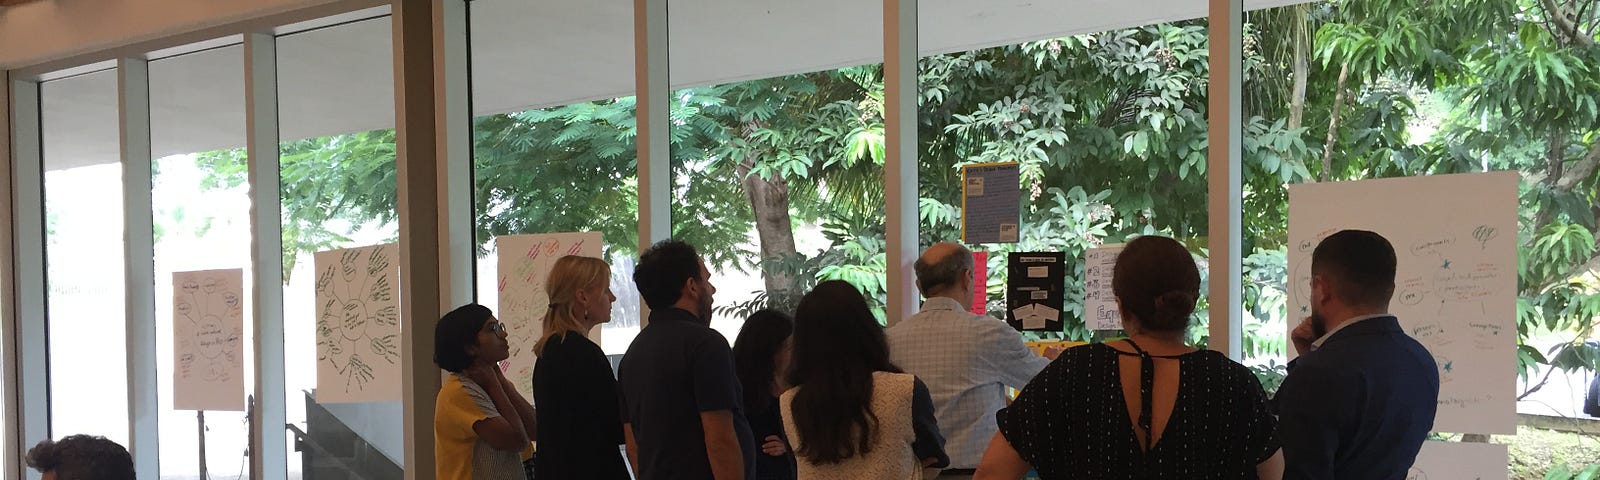 Image of Equity Design participants grouped around posters on a glass wall to check out each other’s work.